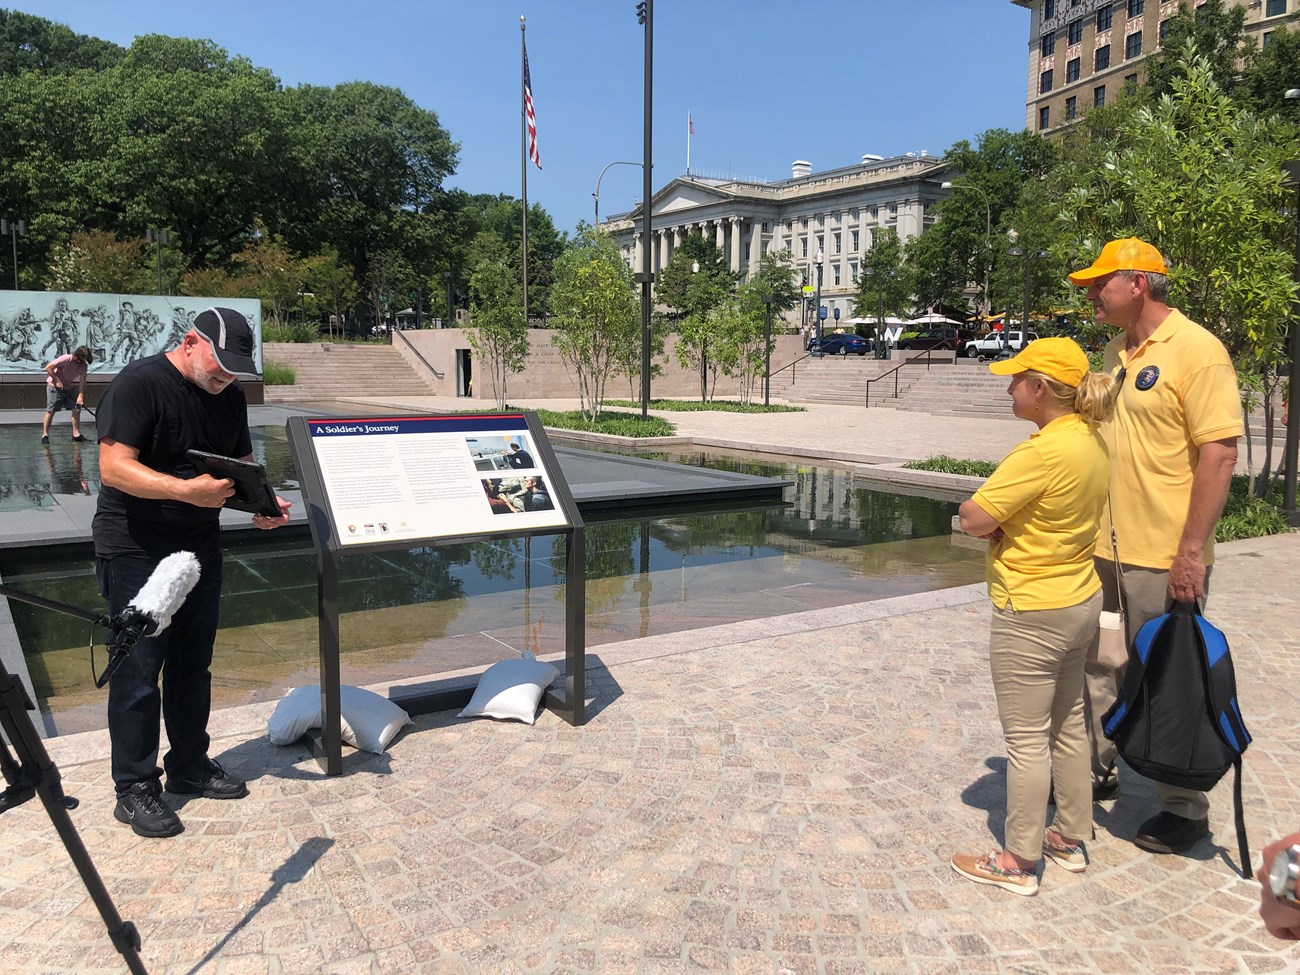 Theo Mayer from the U.S. World War One Centennial Commission/Doughboy Foundation demonstrates virtual interpretation functions on an iPad for volunteers at the newly redesigned World War I Memorial also known as Pershing Square.